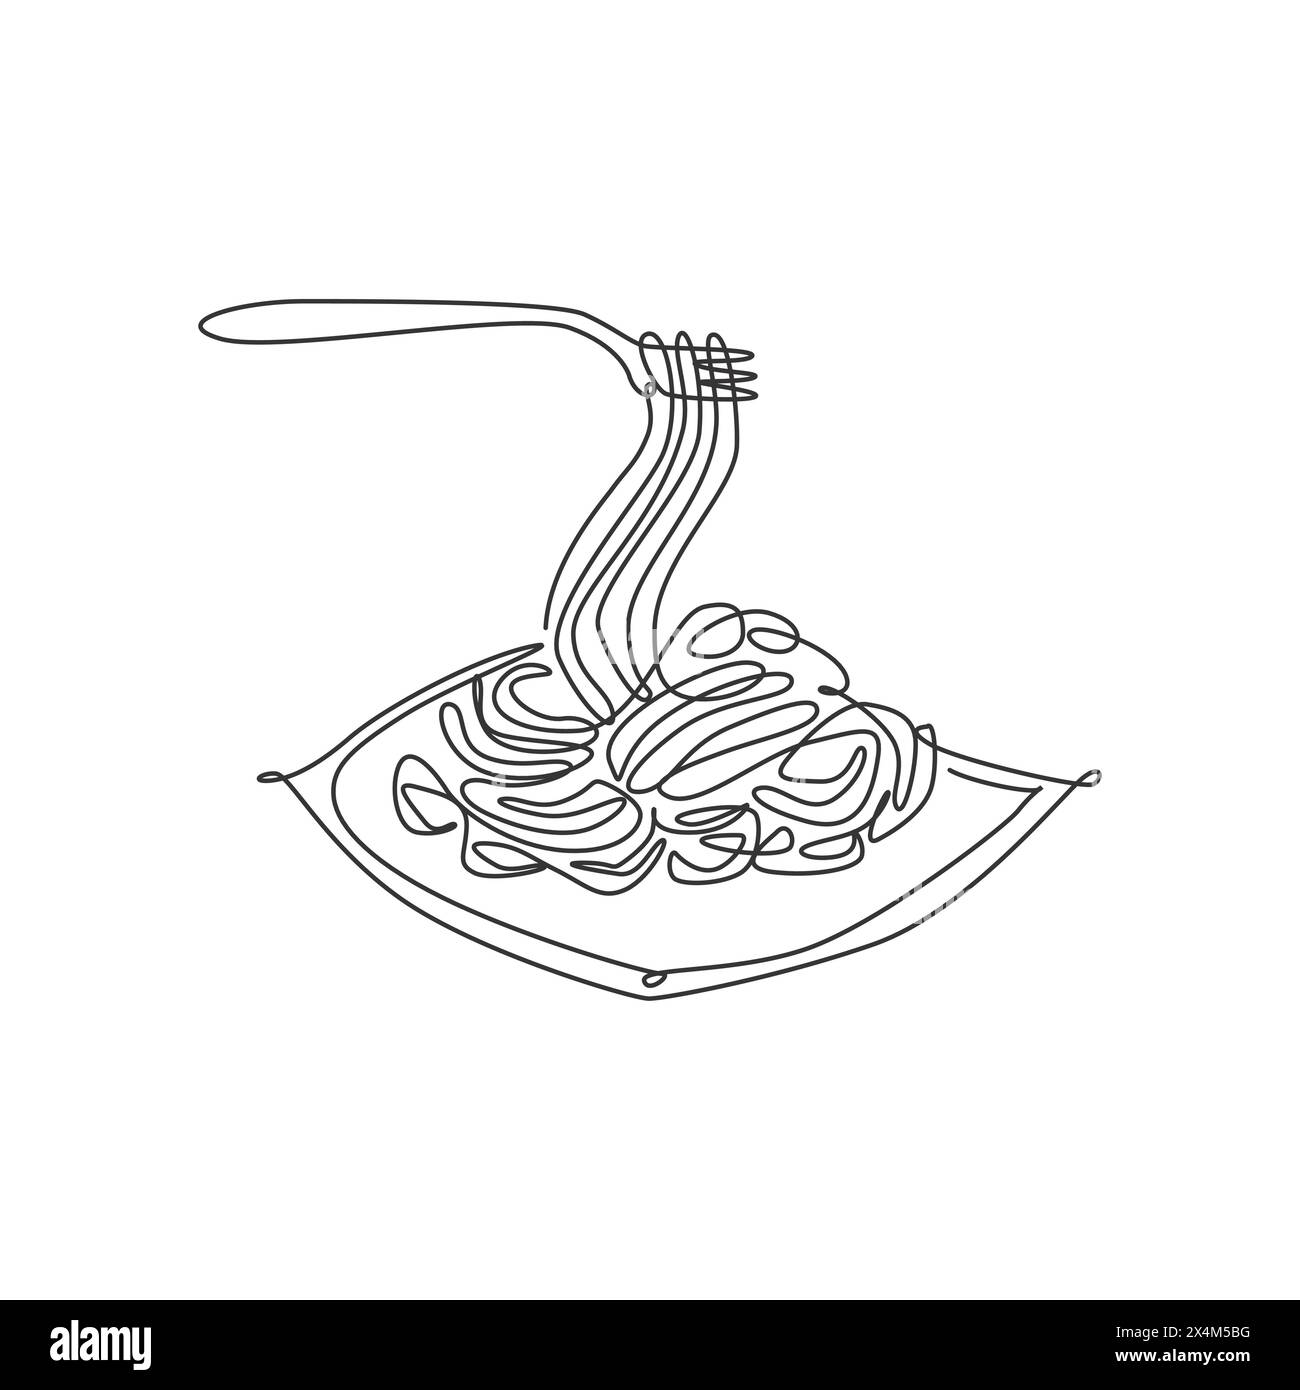 One single line drawing of fresh delicious Italian spaghetti logo vector illustration. Pasta fast food cafe menu and restaurant badge concept. Modern Stock Vector